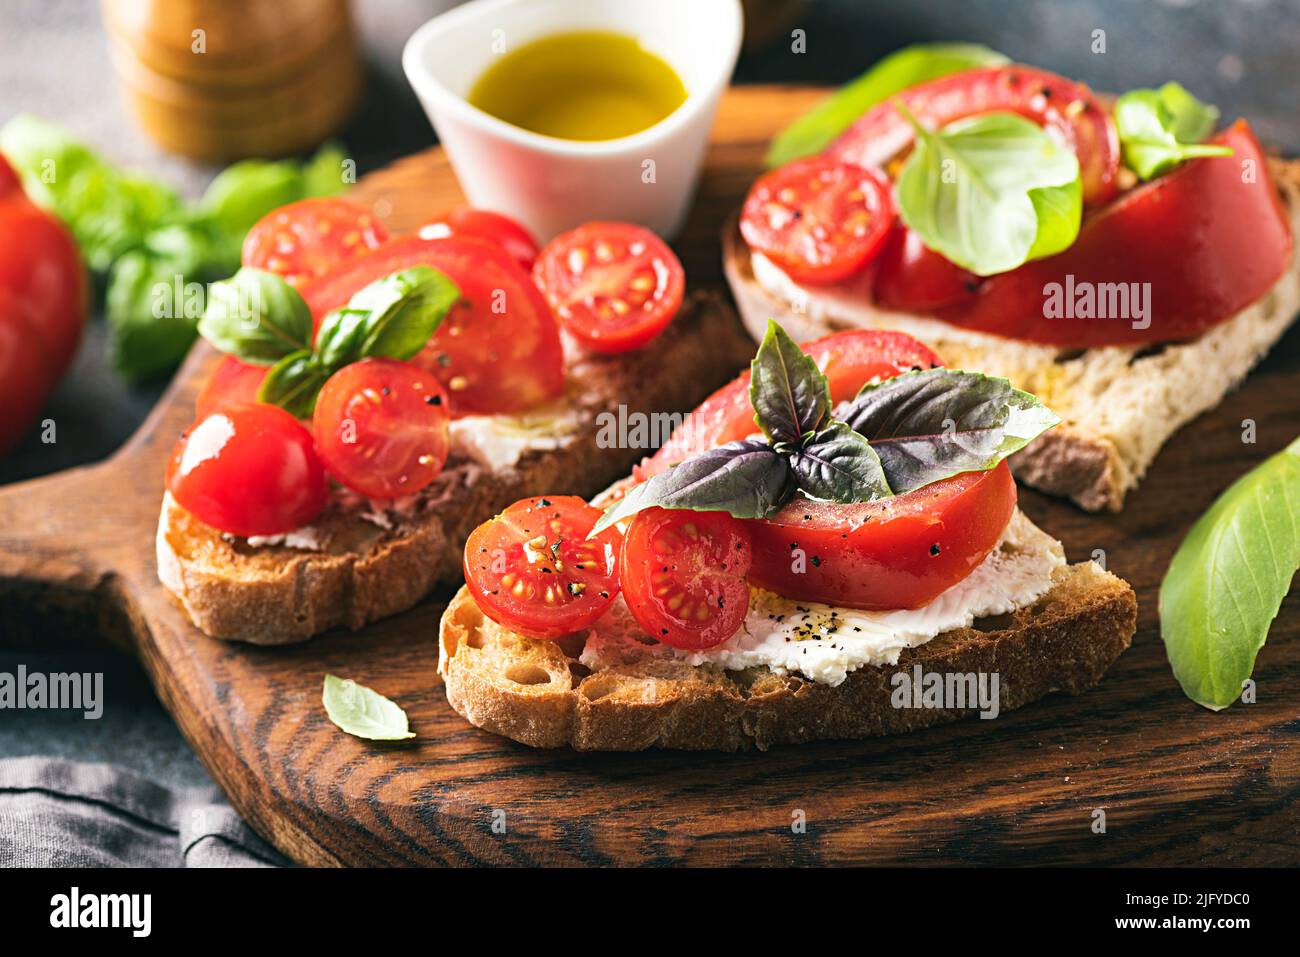 Bruschetta with tomatoes, basil and olive oil on a wooden board. Italian cuisine appetizer Stock Photo